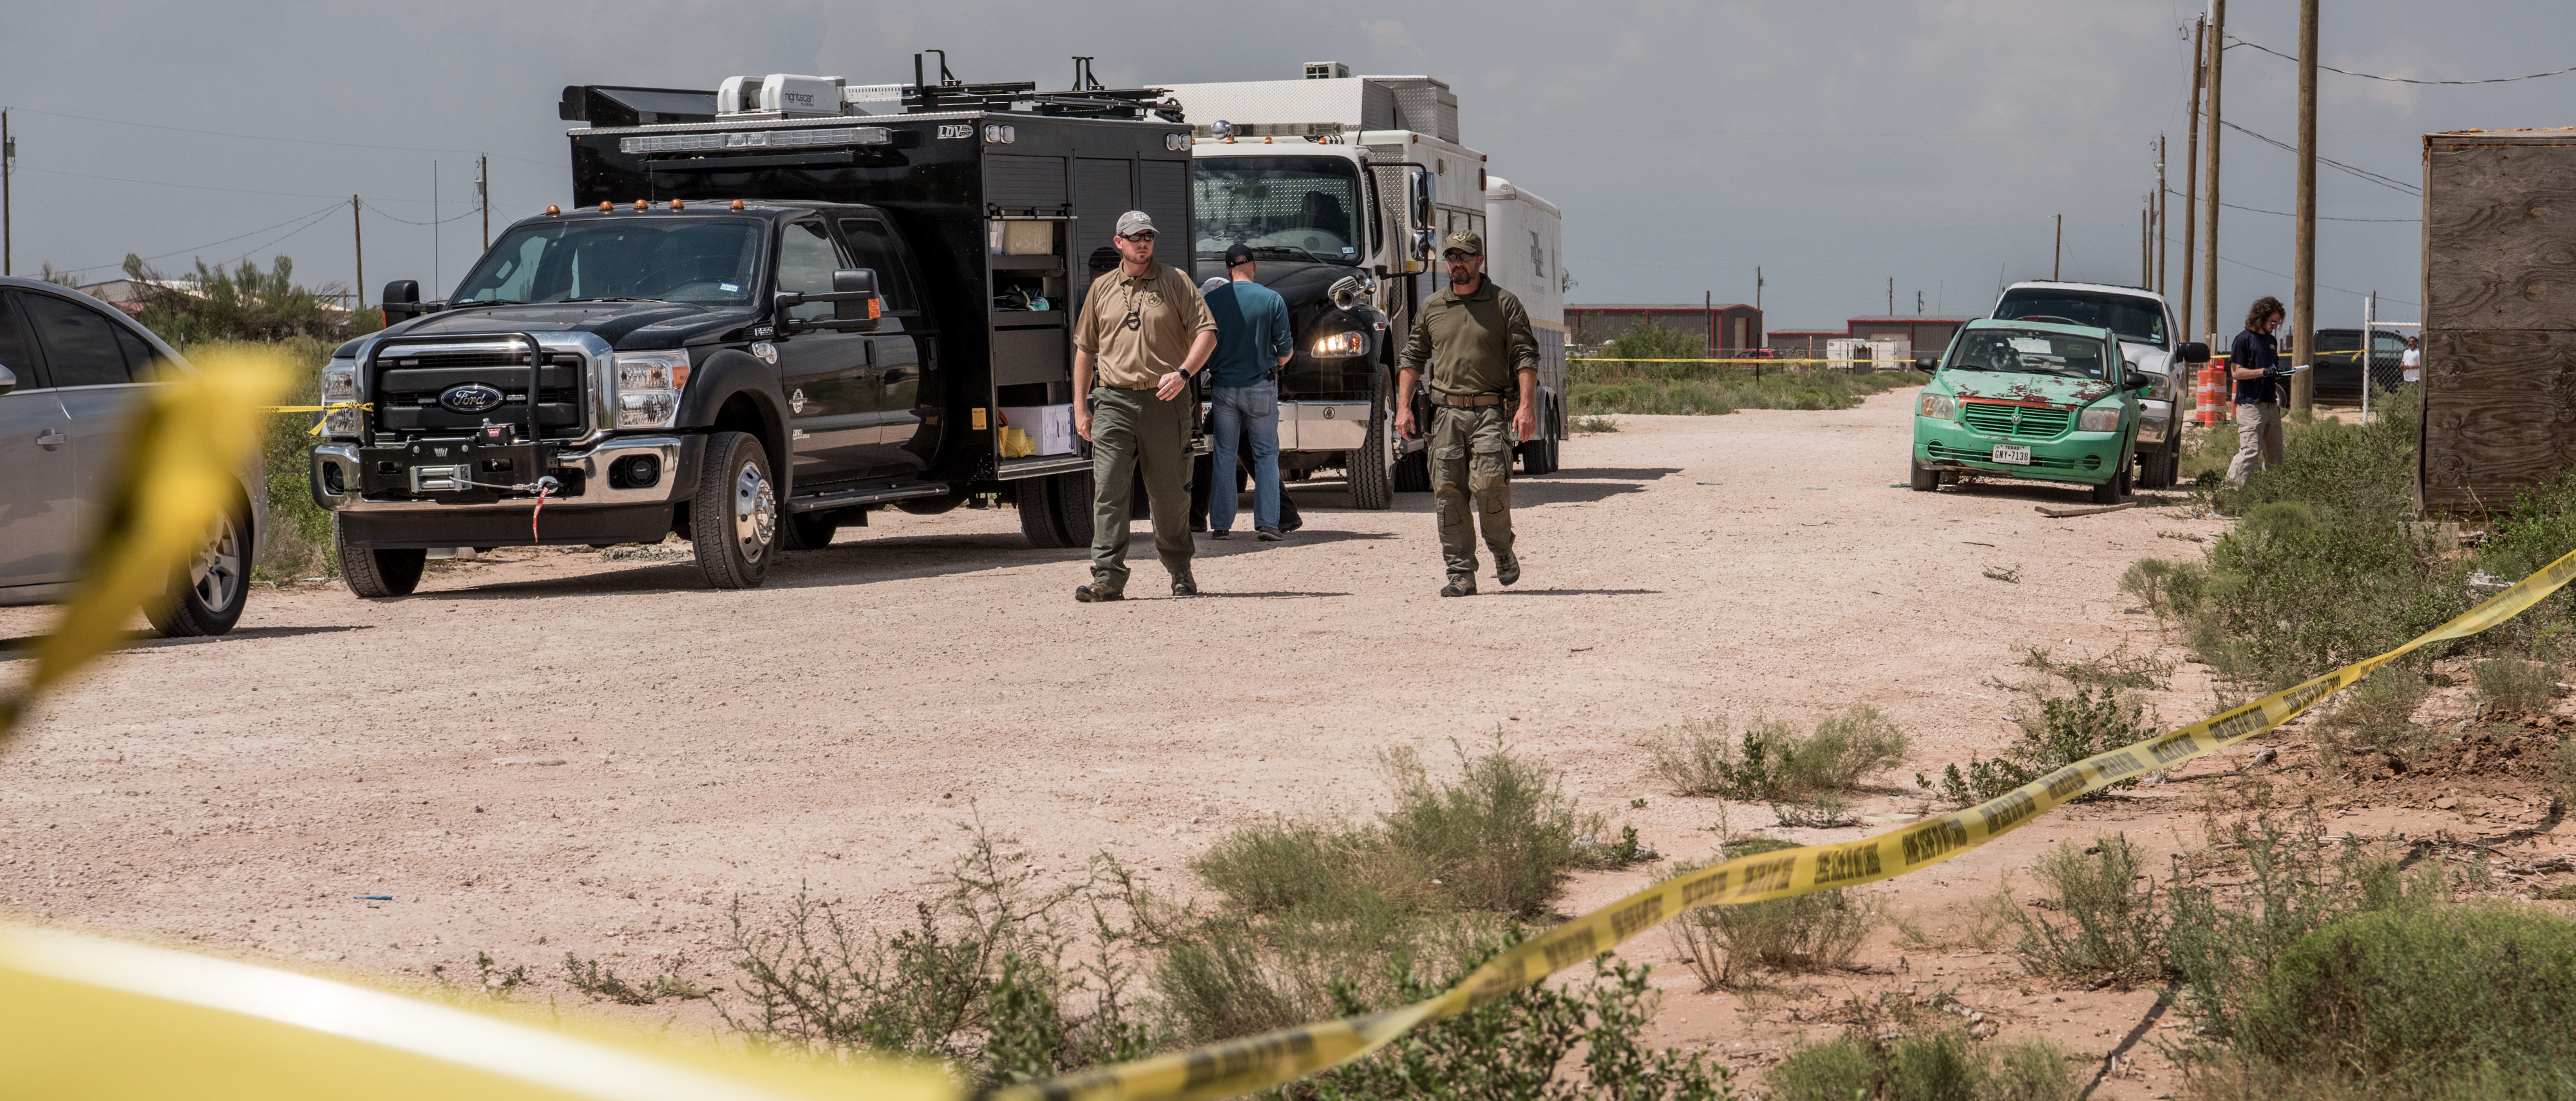 Suspect In Texas Shooting Reportedly Lost Job Before Rampage | The Daily Caller4000 x 1710